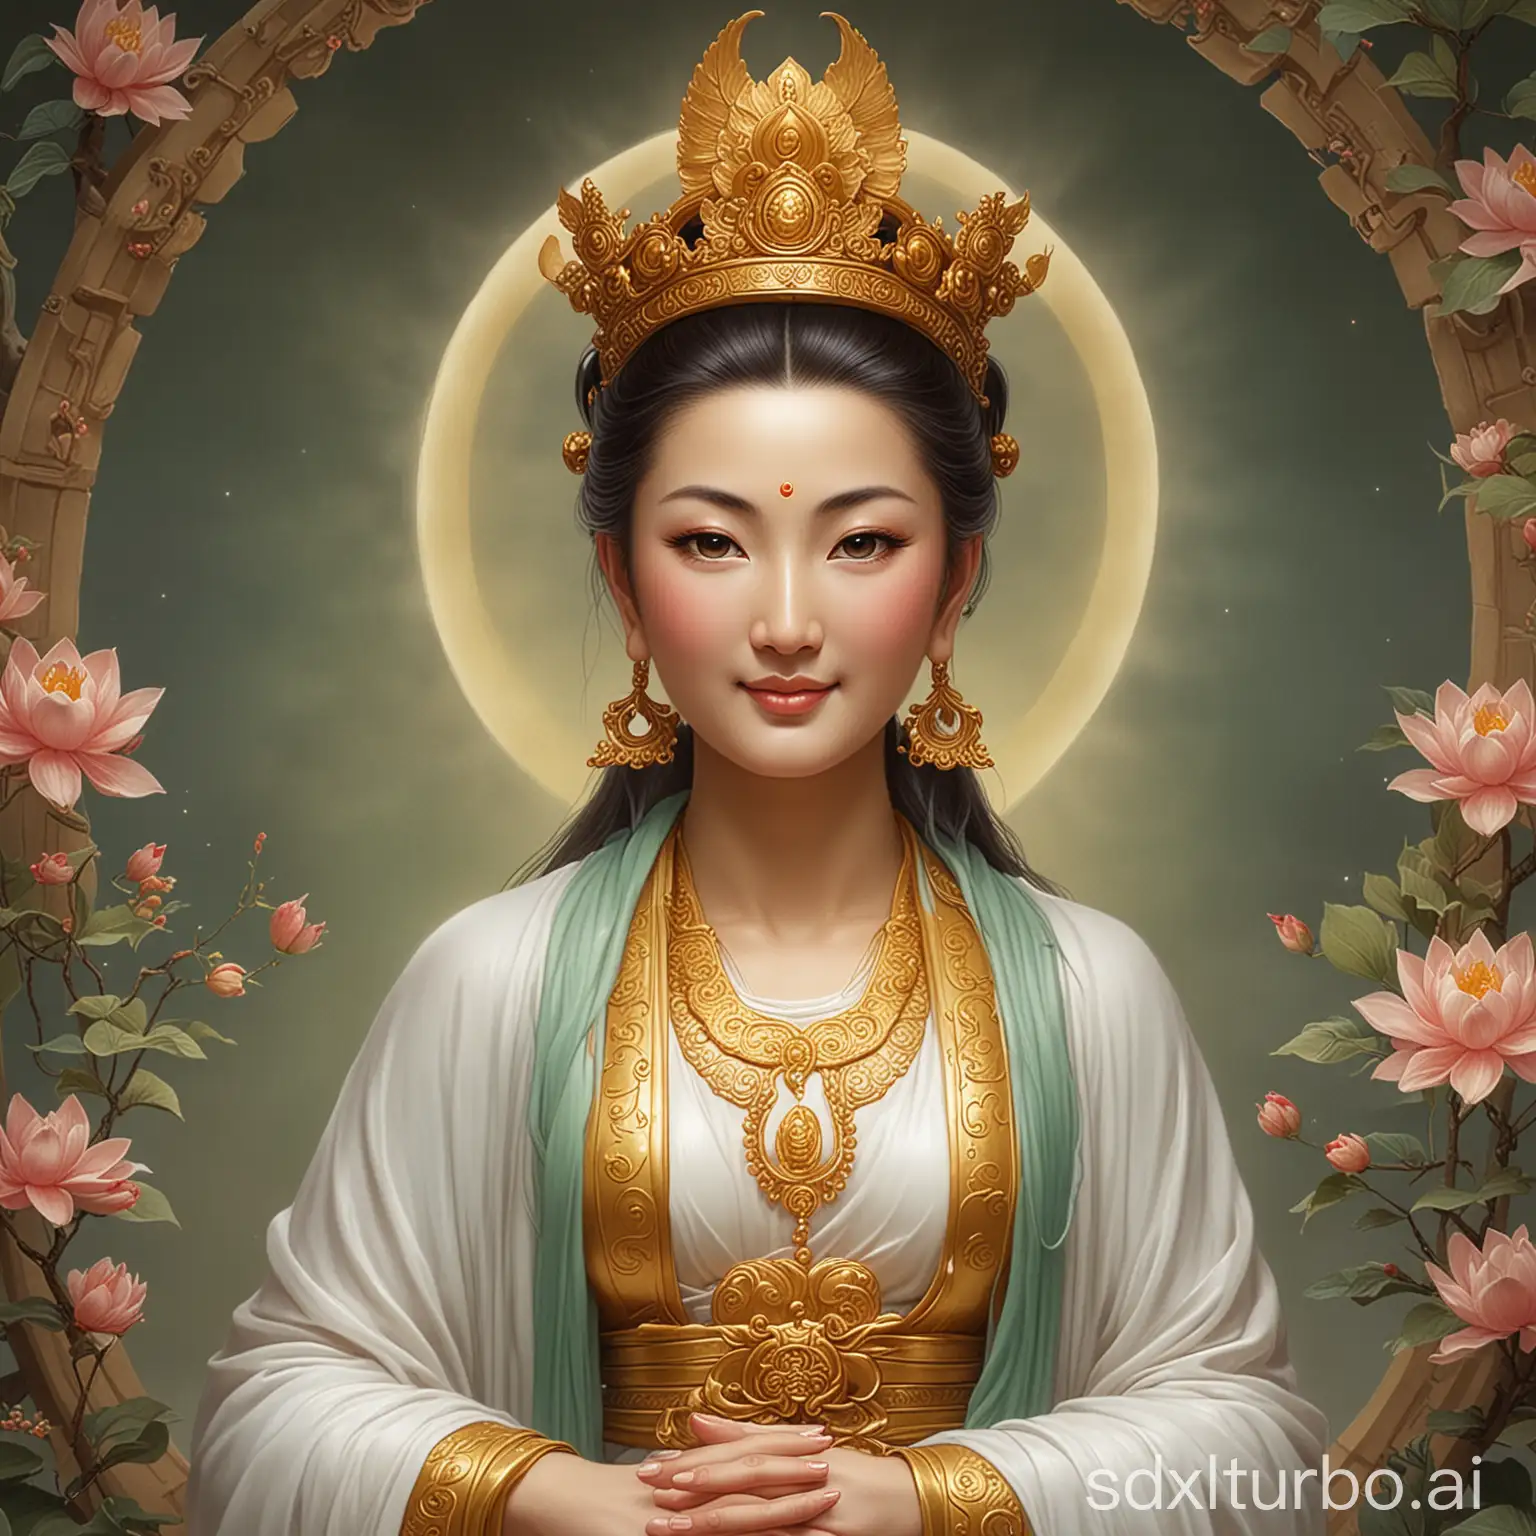 Guanyin Bodhisattva has beautiful physical characteristics, usually with a smiling face and kind eyes. Their eyes are wide open, filled with wisdom and compassion, giving people a sense of warmth and tranquility.